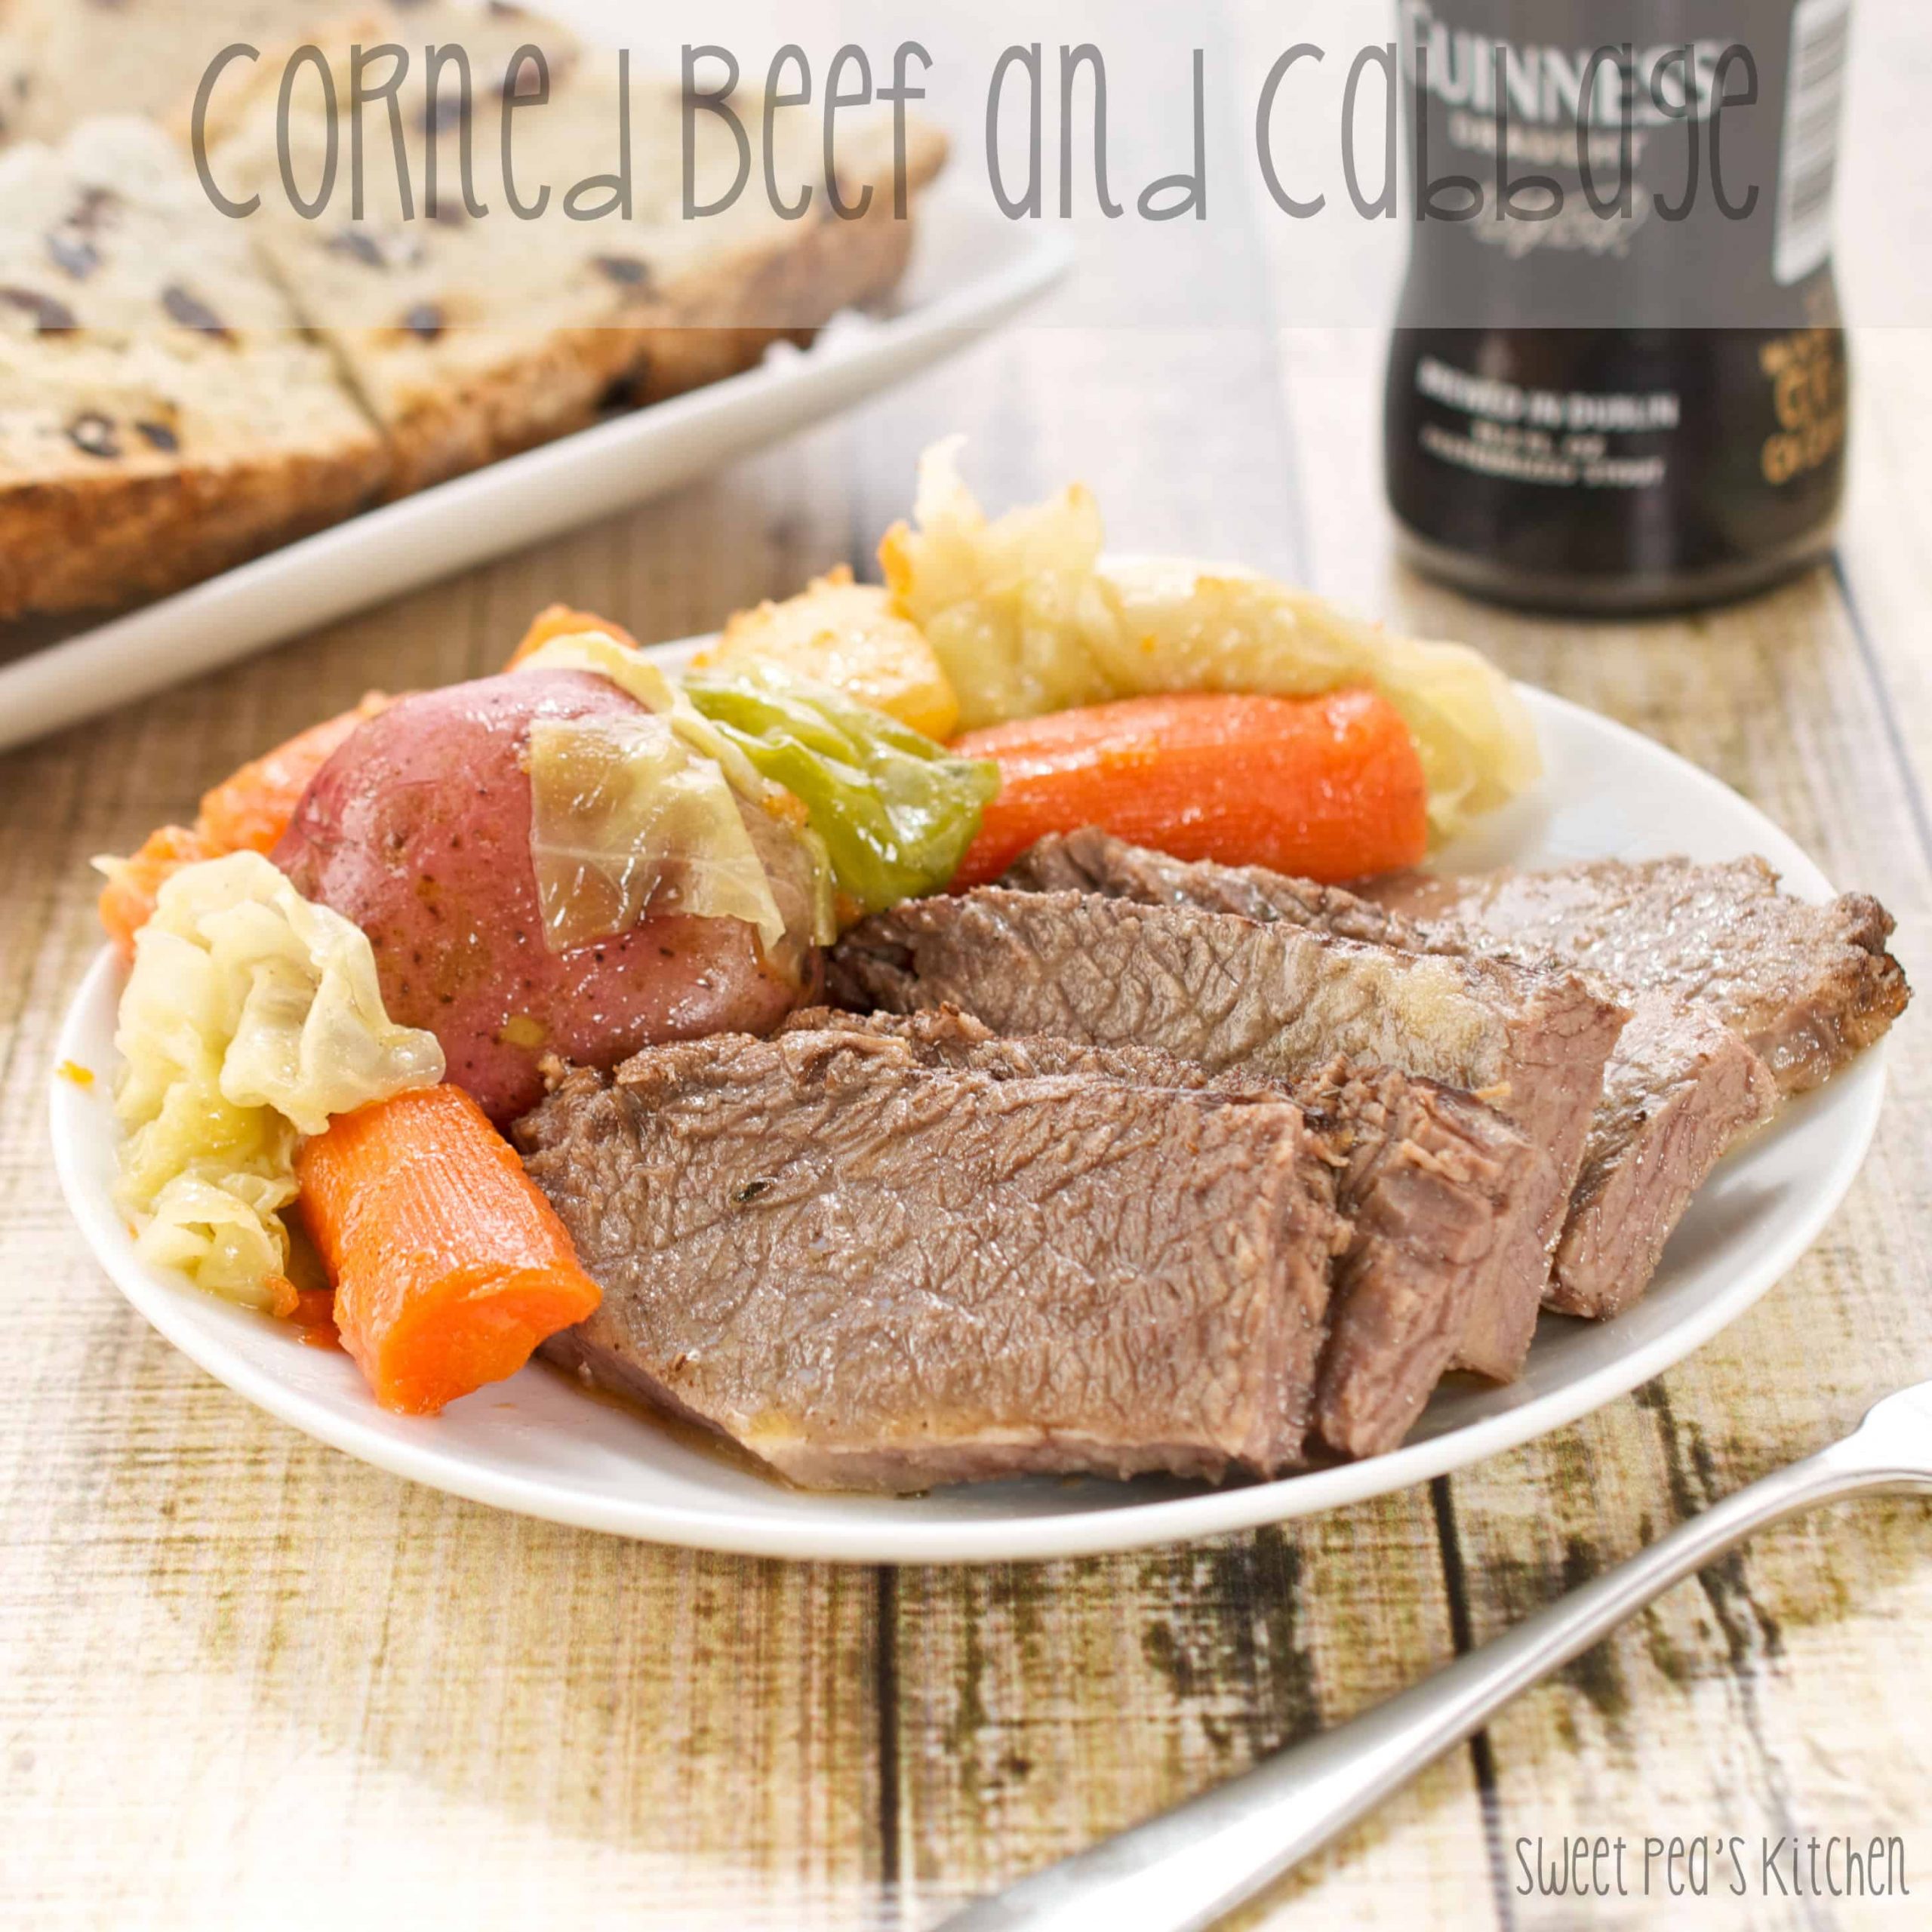 Easy Baked Corned Beef and Cabbage on a plate with vegetables